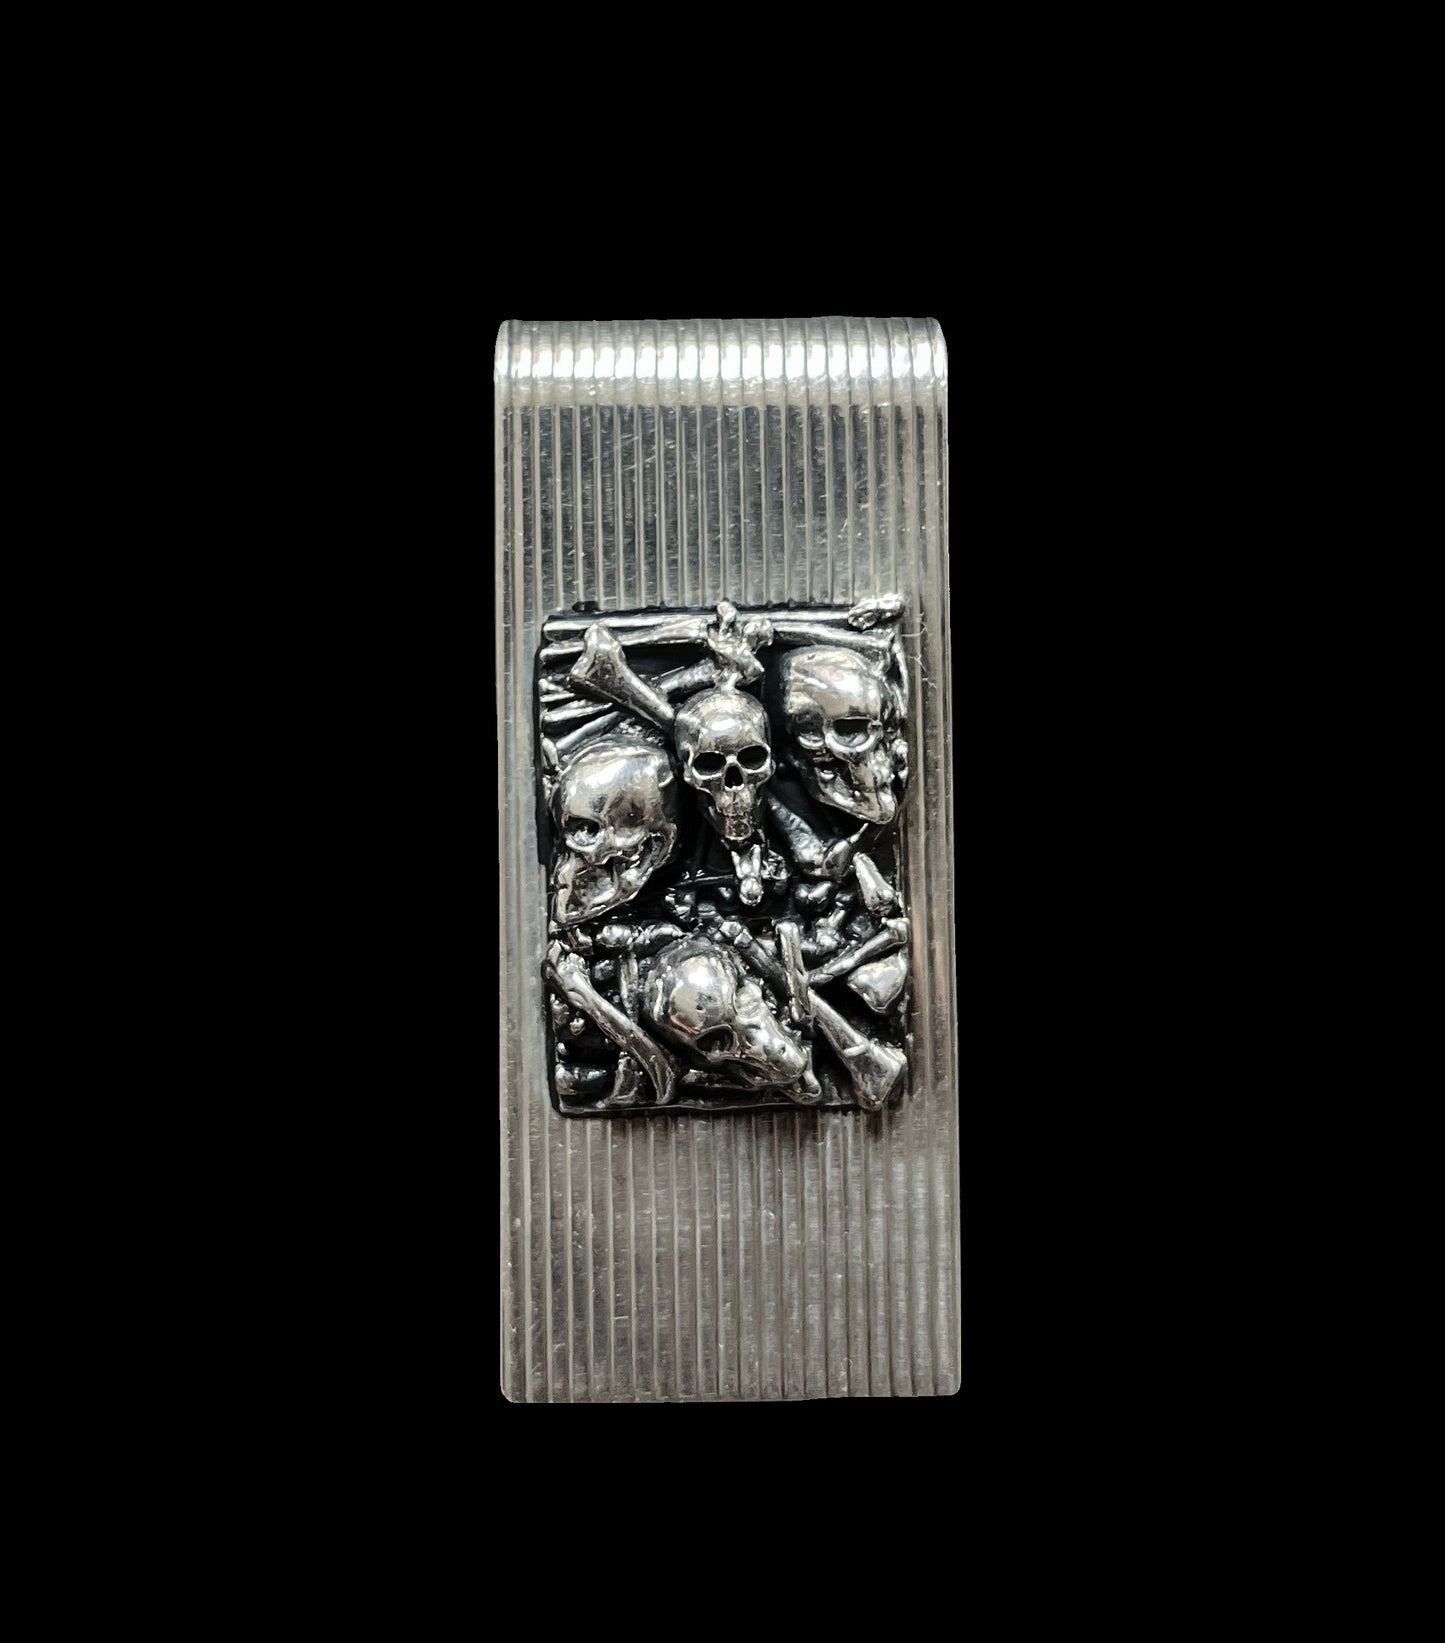 Solid Sterling Silver Money Clip with Skull and Bones